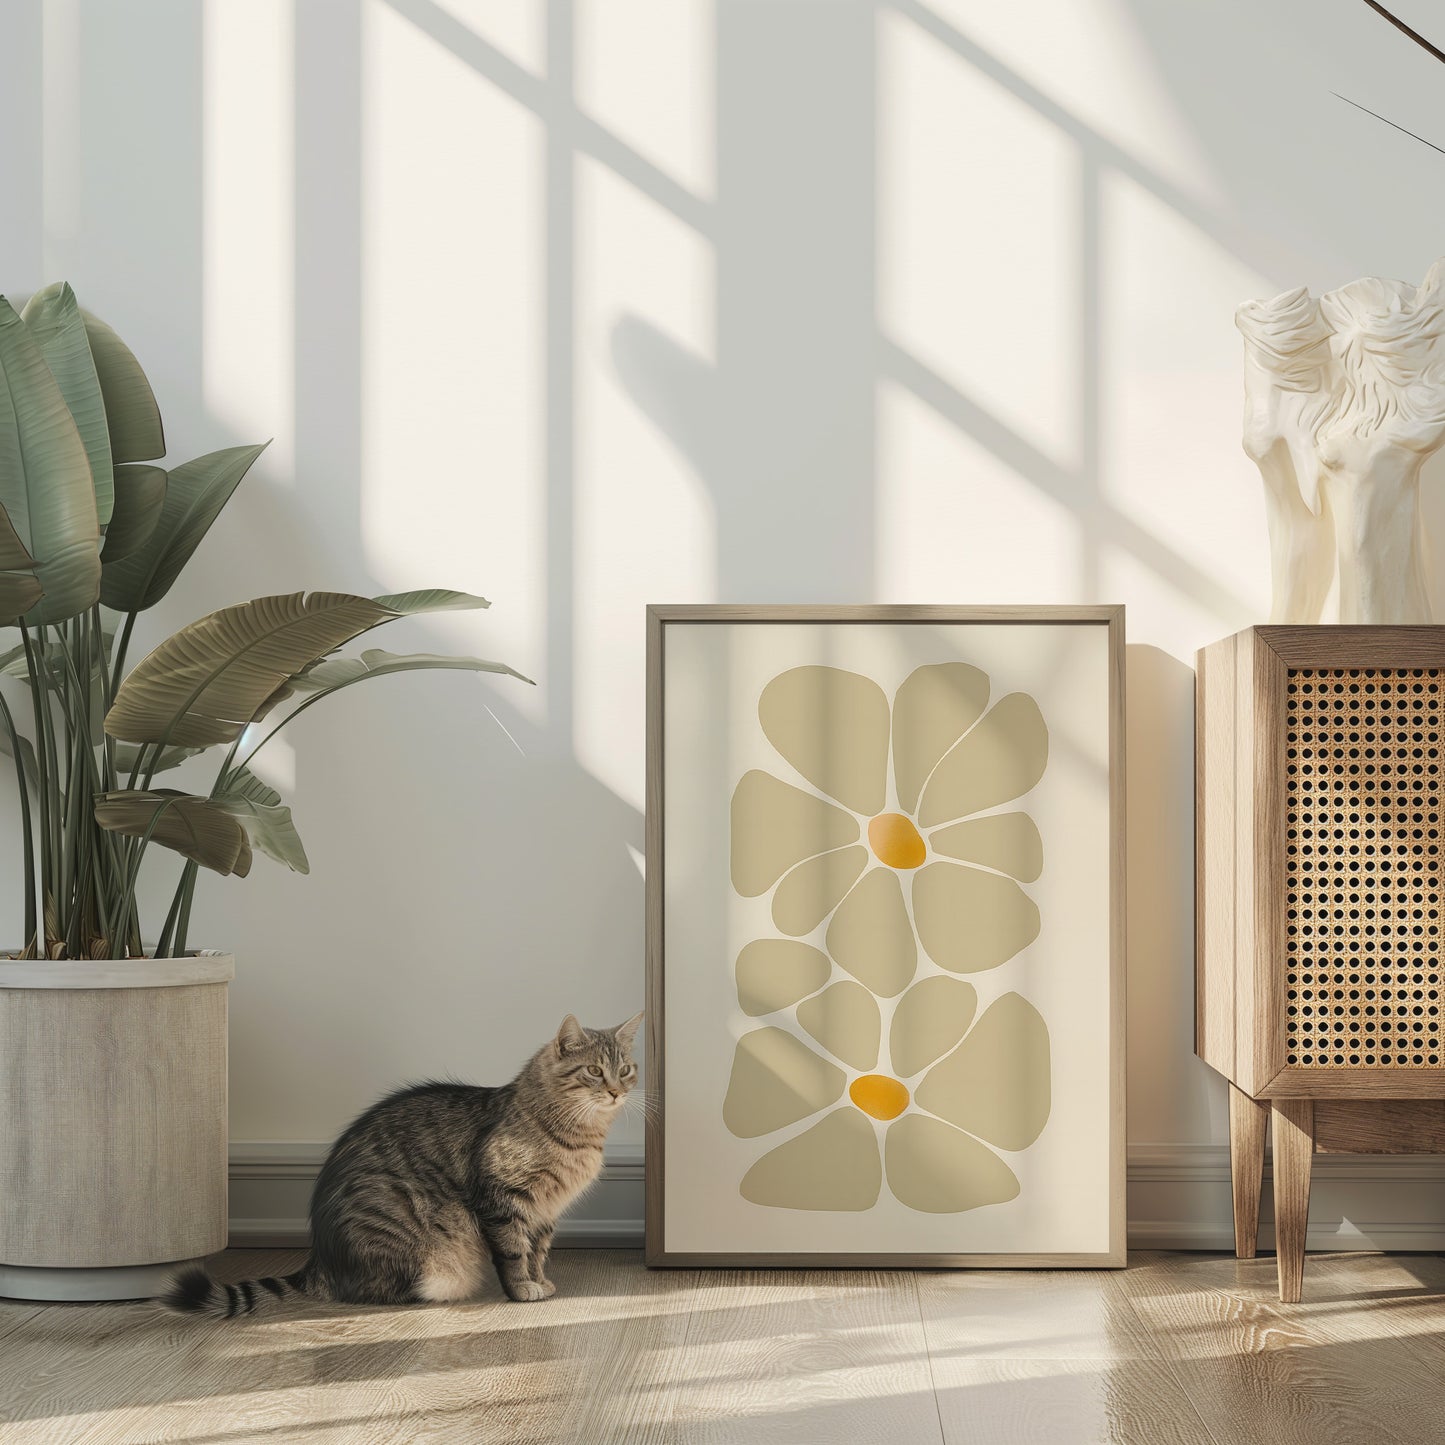 A cat next to a framed artwork with a floral design in a sunlit room.